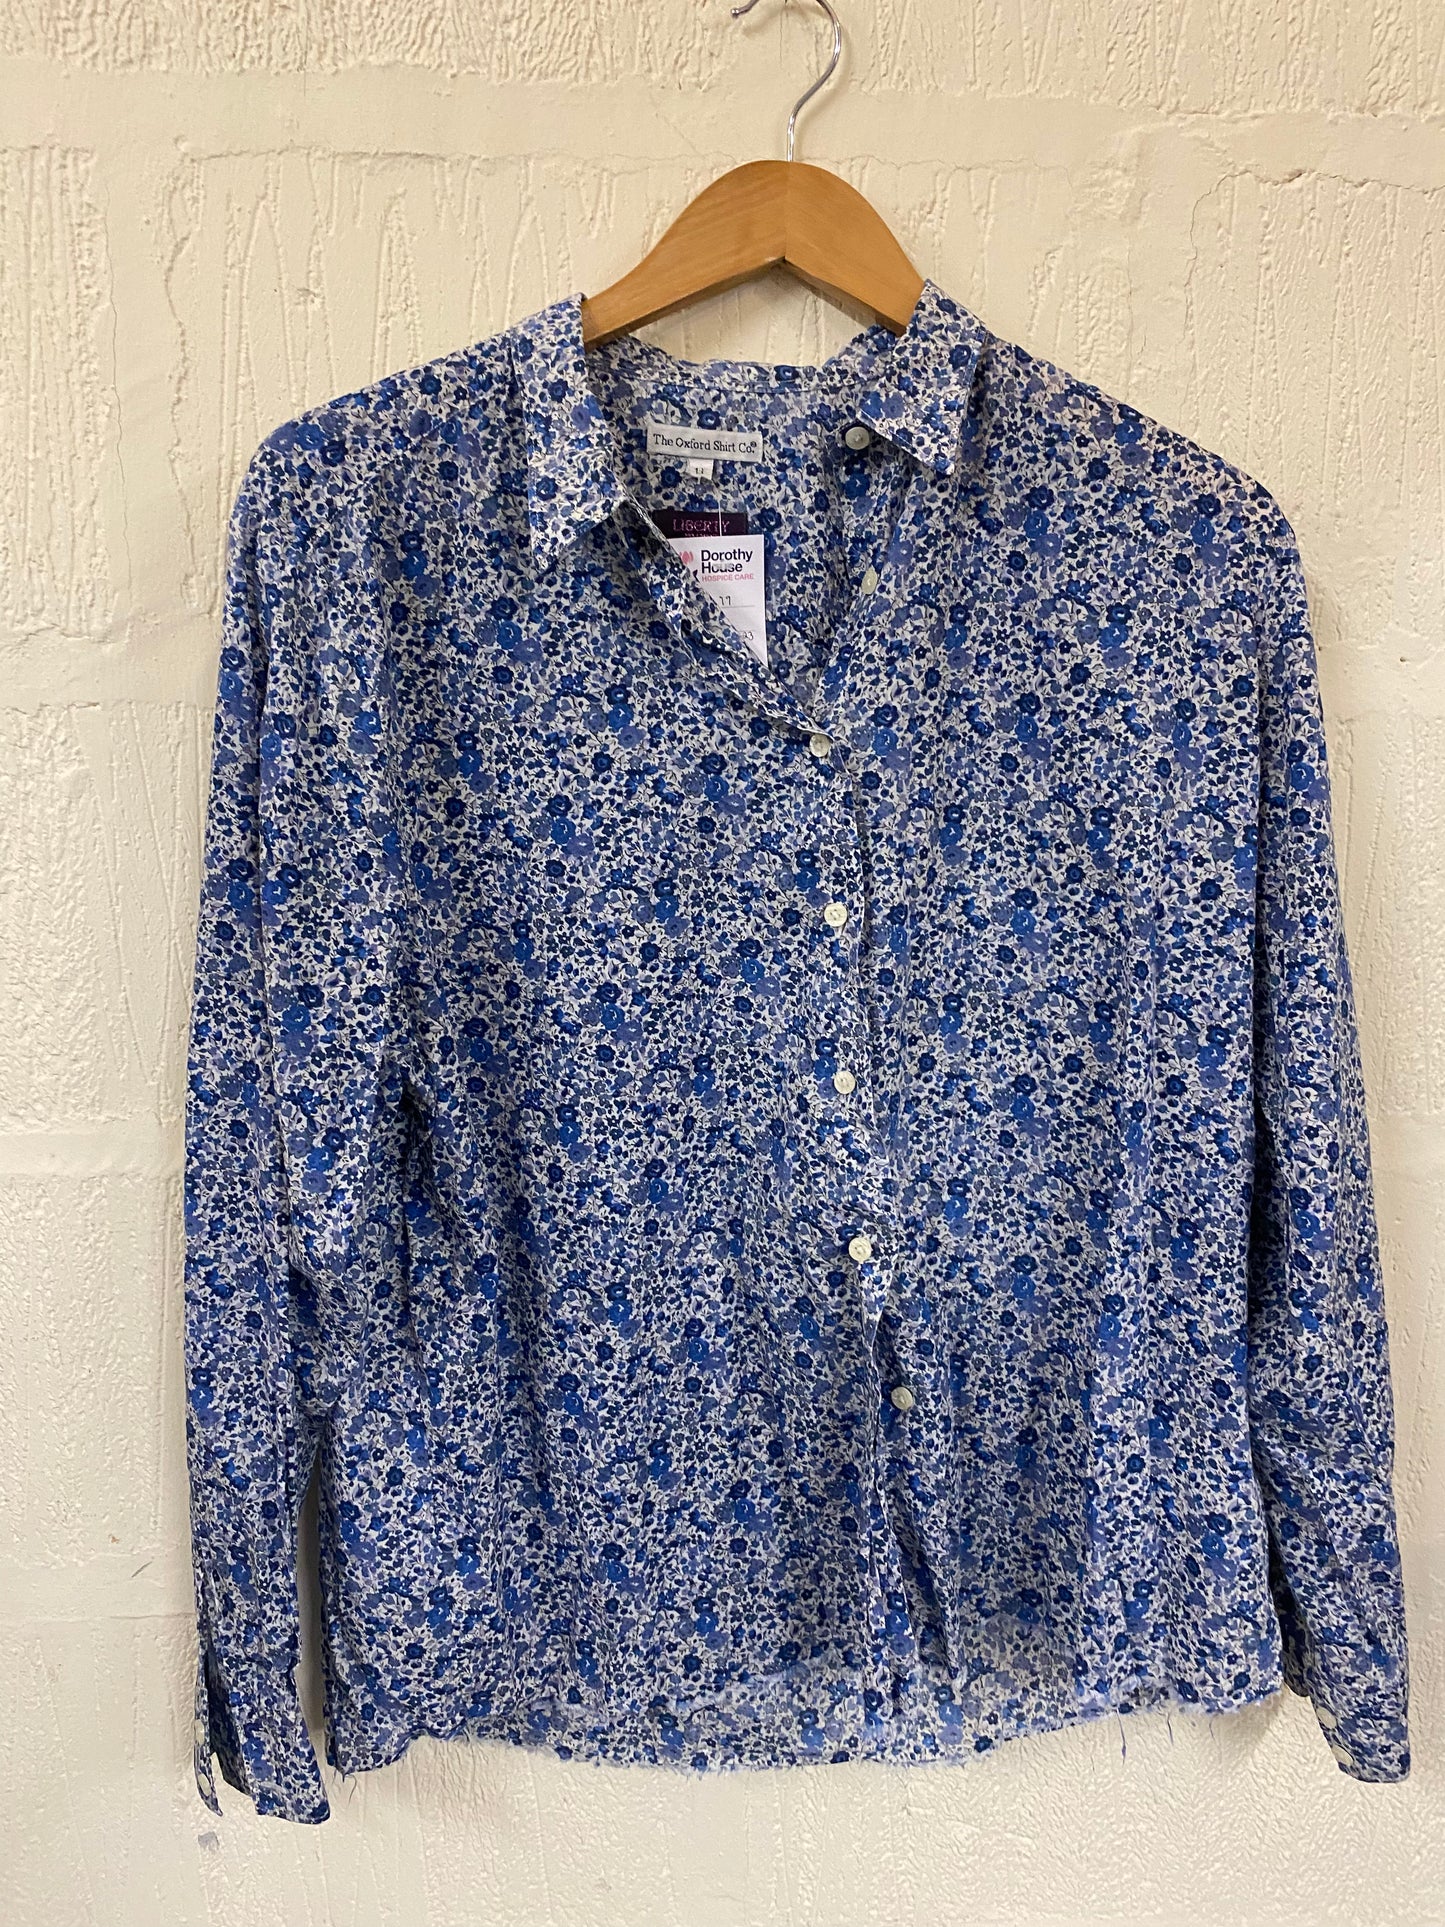 Vintage White with Blue Floral Liberty Print Shirt Size 18